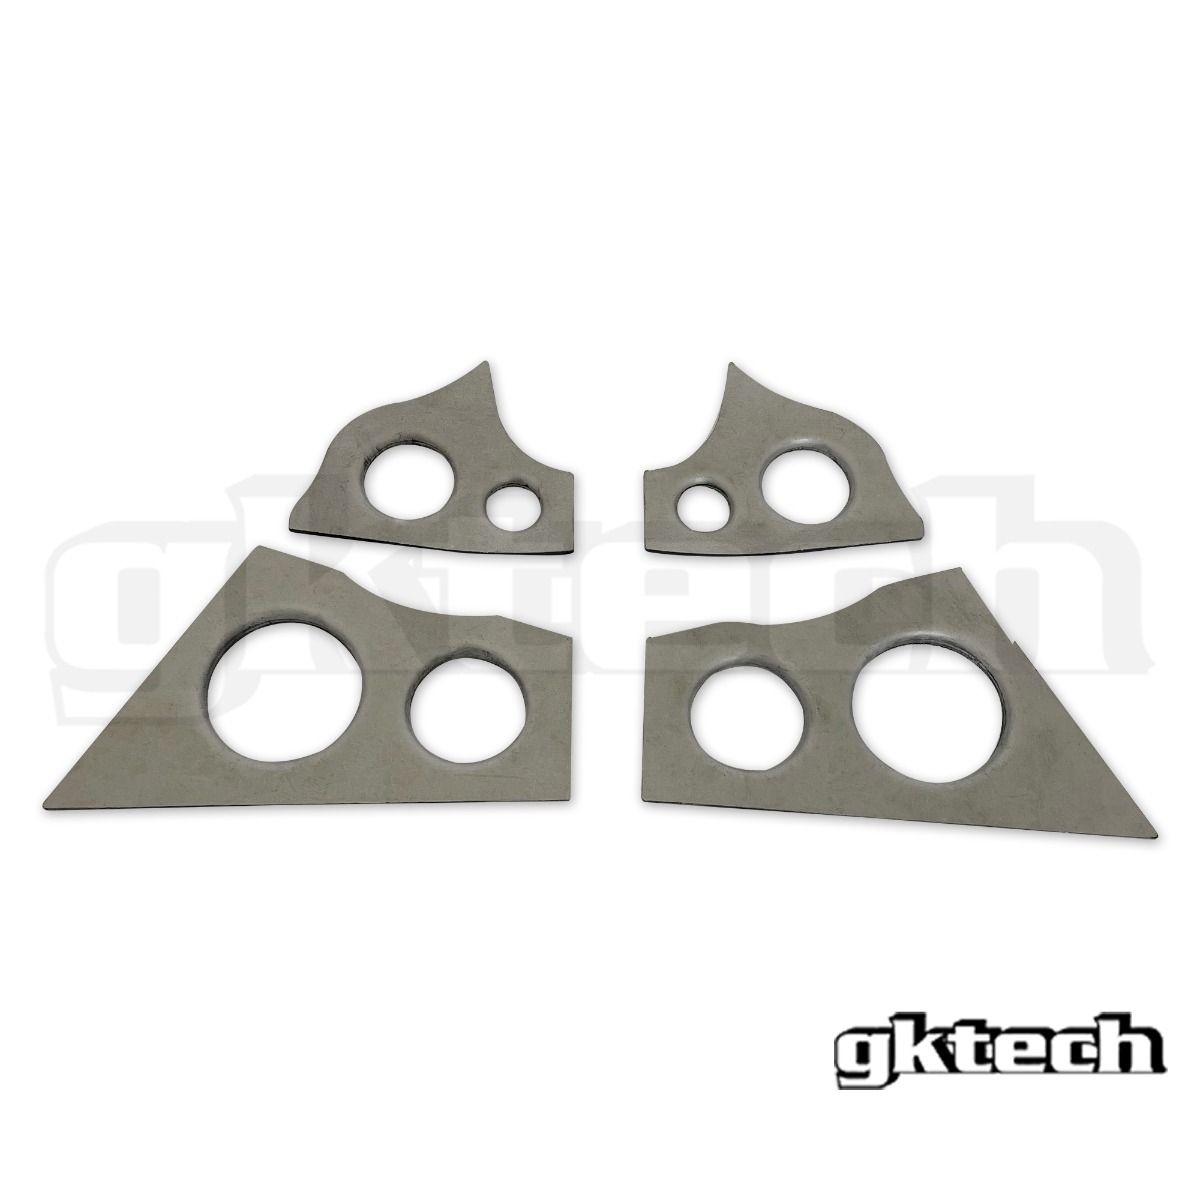 GKTech Rear Lower Control Arm Weld In Reinforcement Plates - Nissan S14, S15, R33 GTS